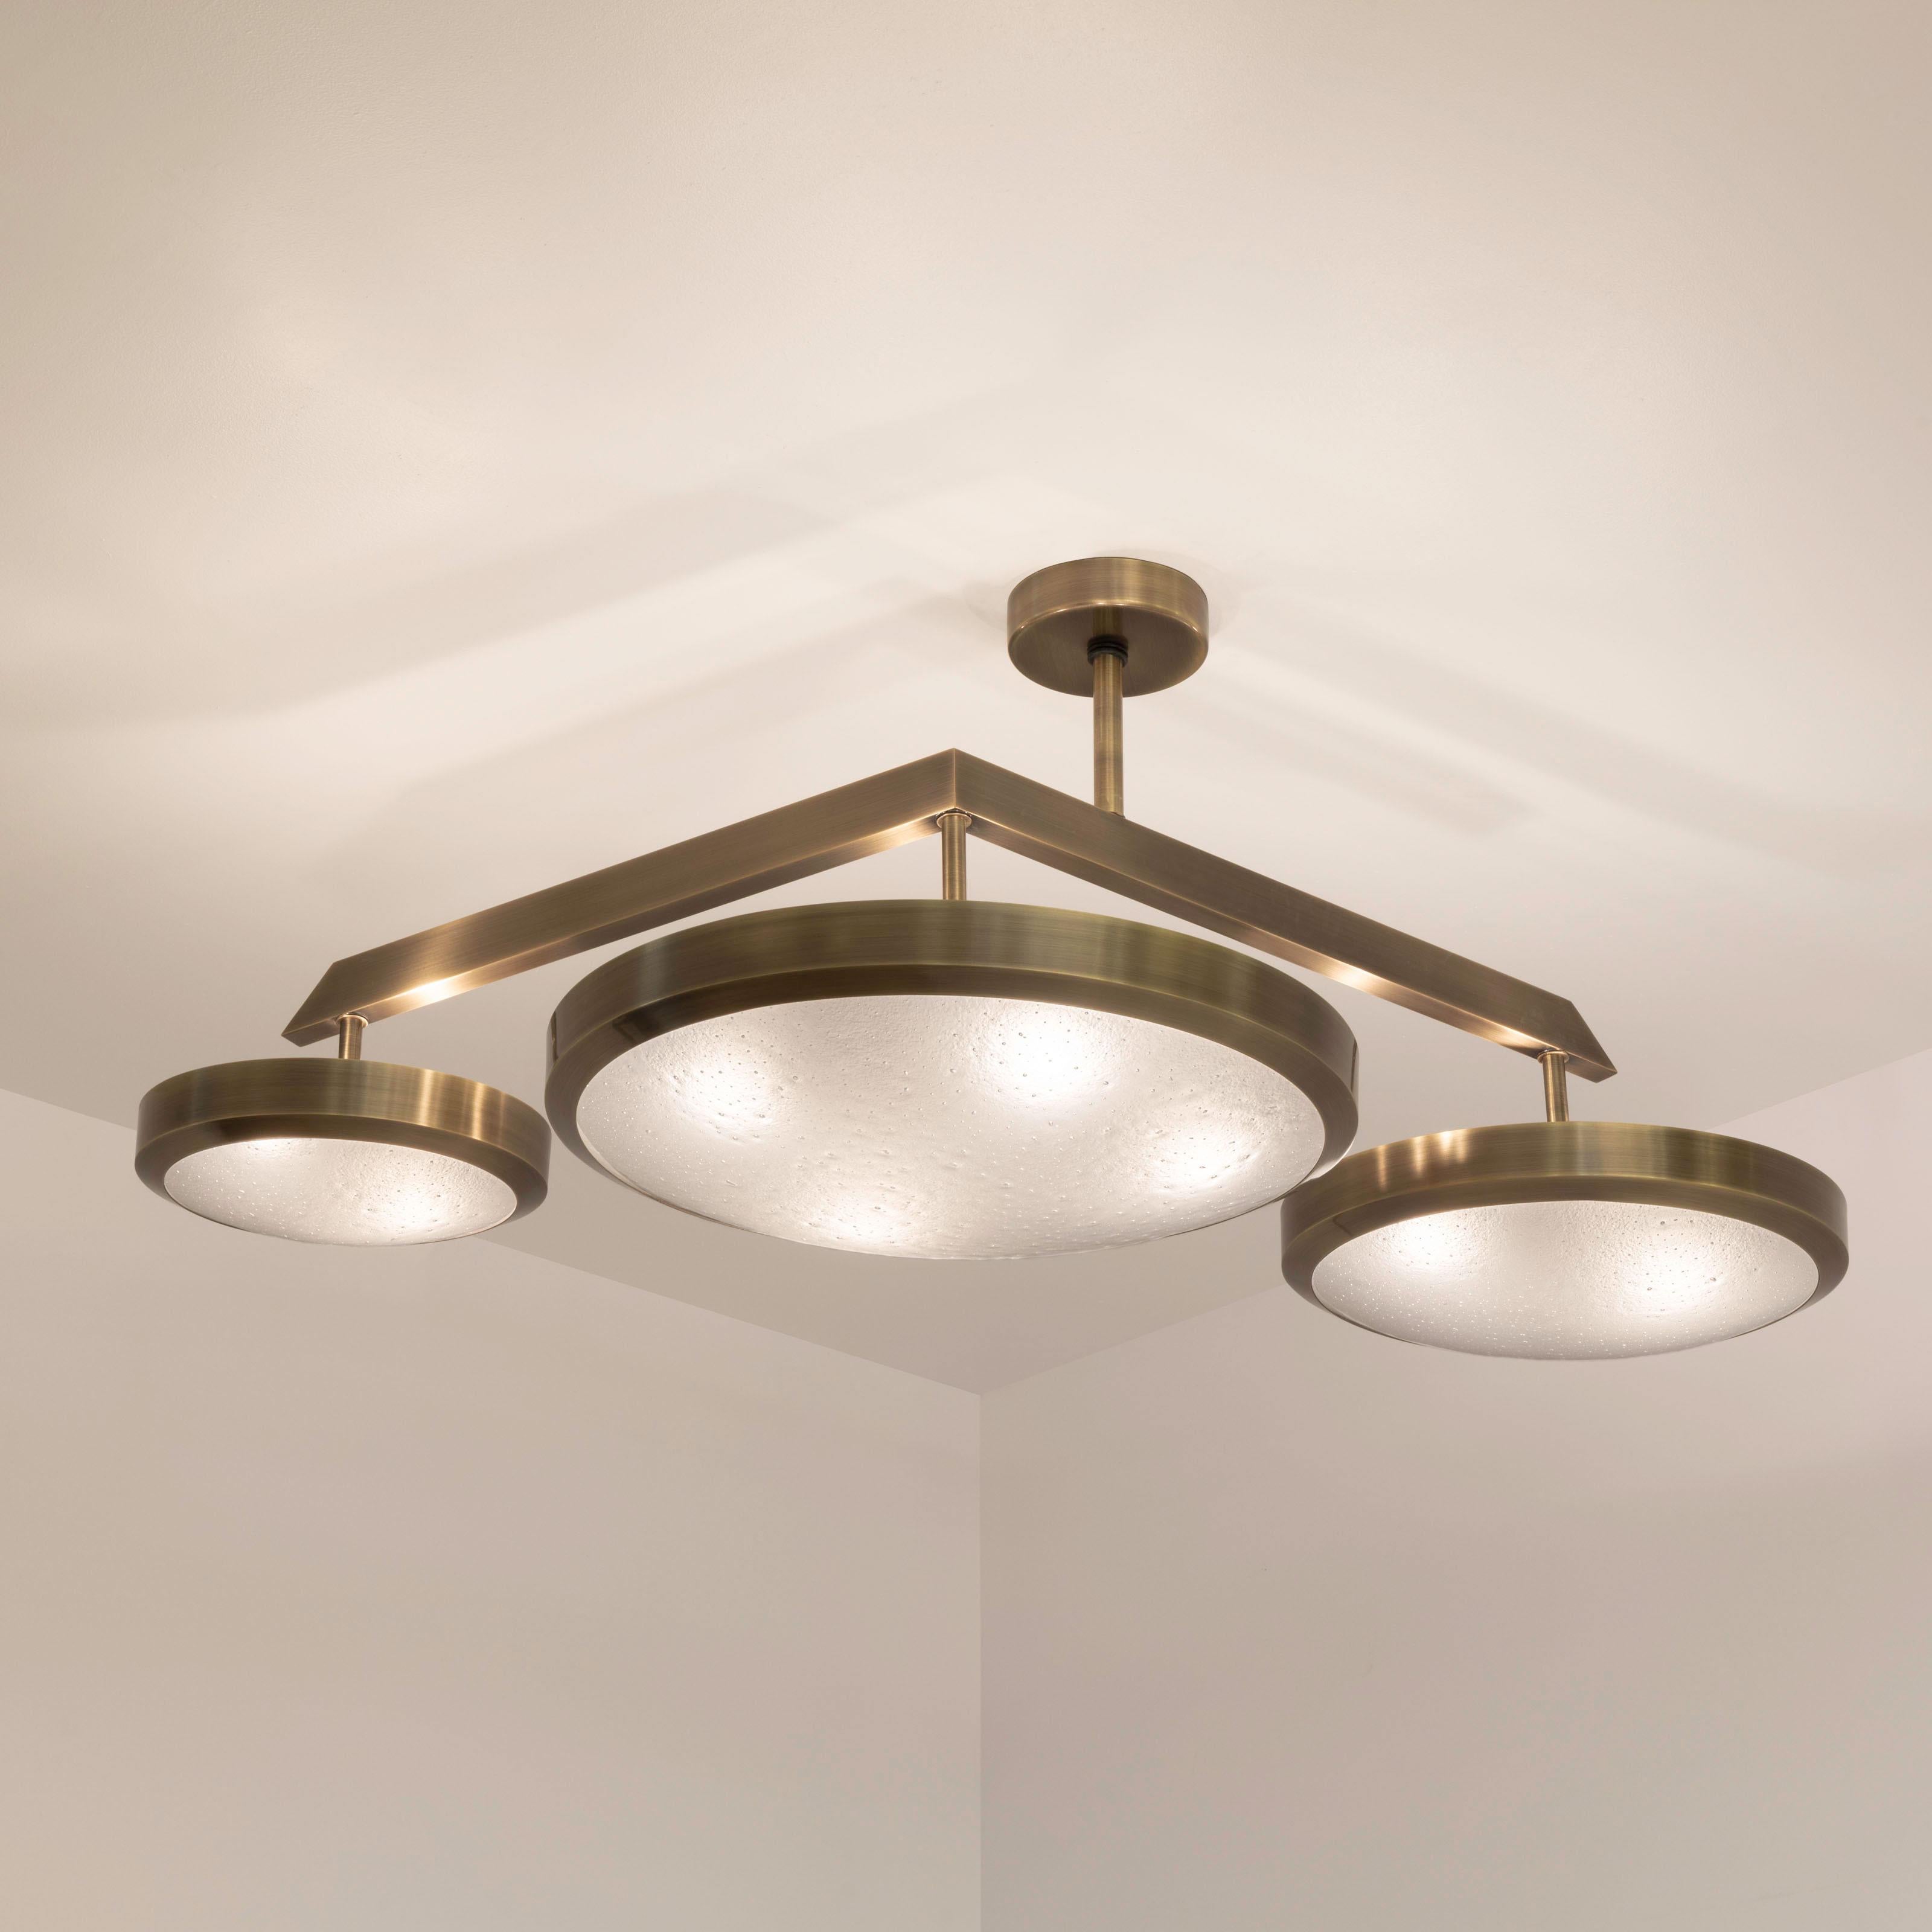 Zeta Ceiling Light by Gaspare Asaro - Satin Brass Finish For Sale 3